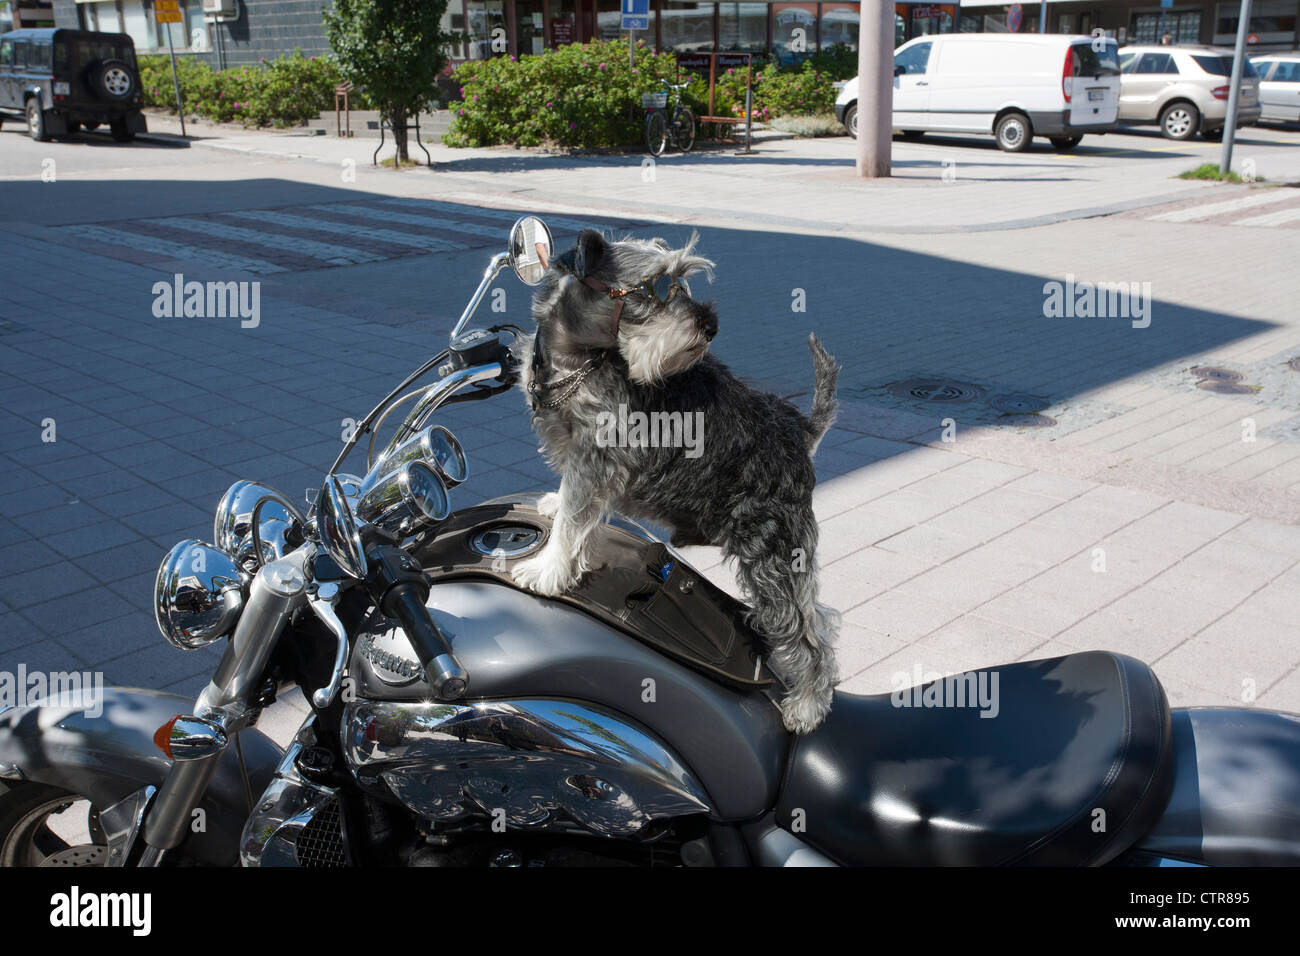 small dog wearing goggles and standing on Triumph motorcycle tank, Hanko Finland Stock Photo